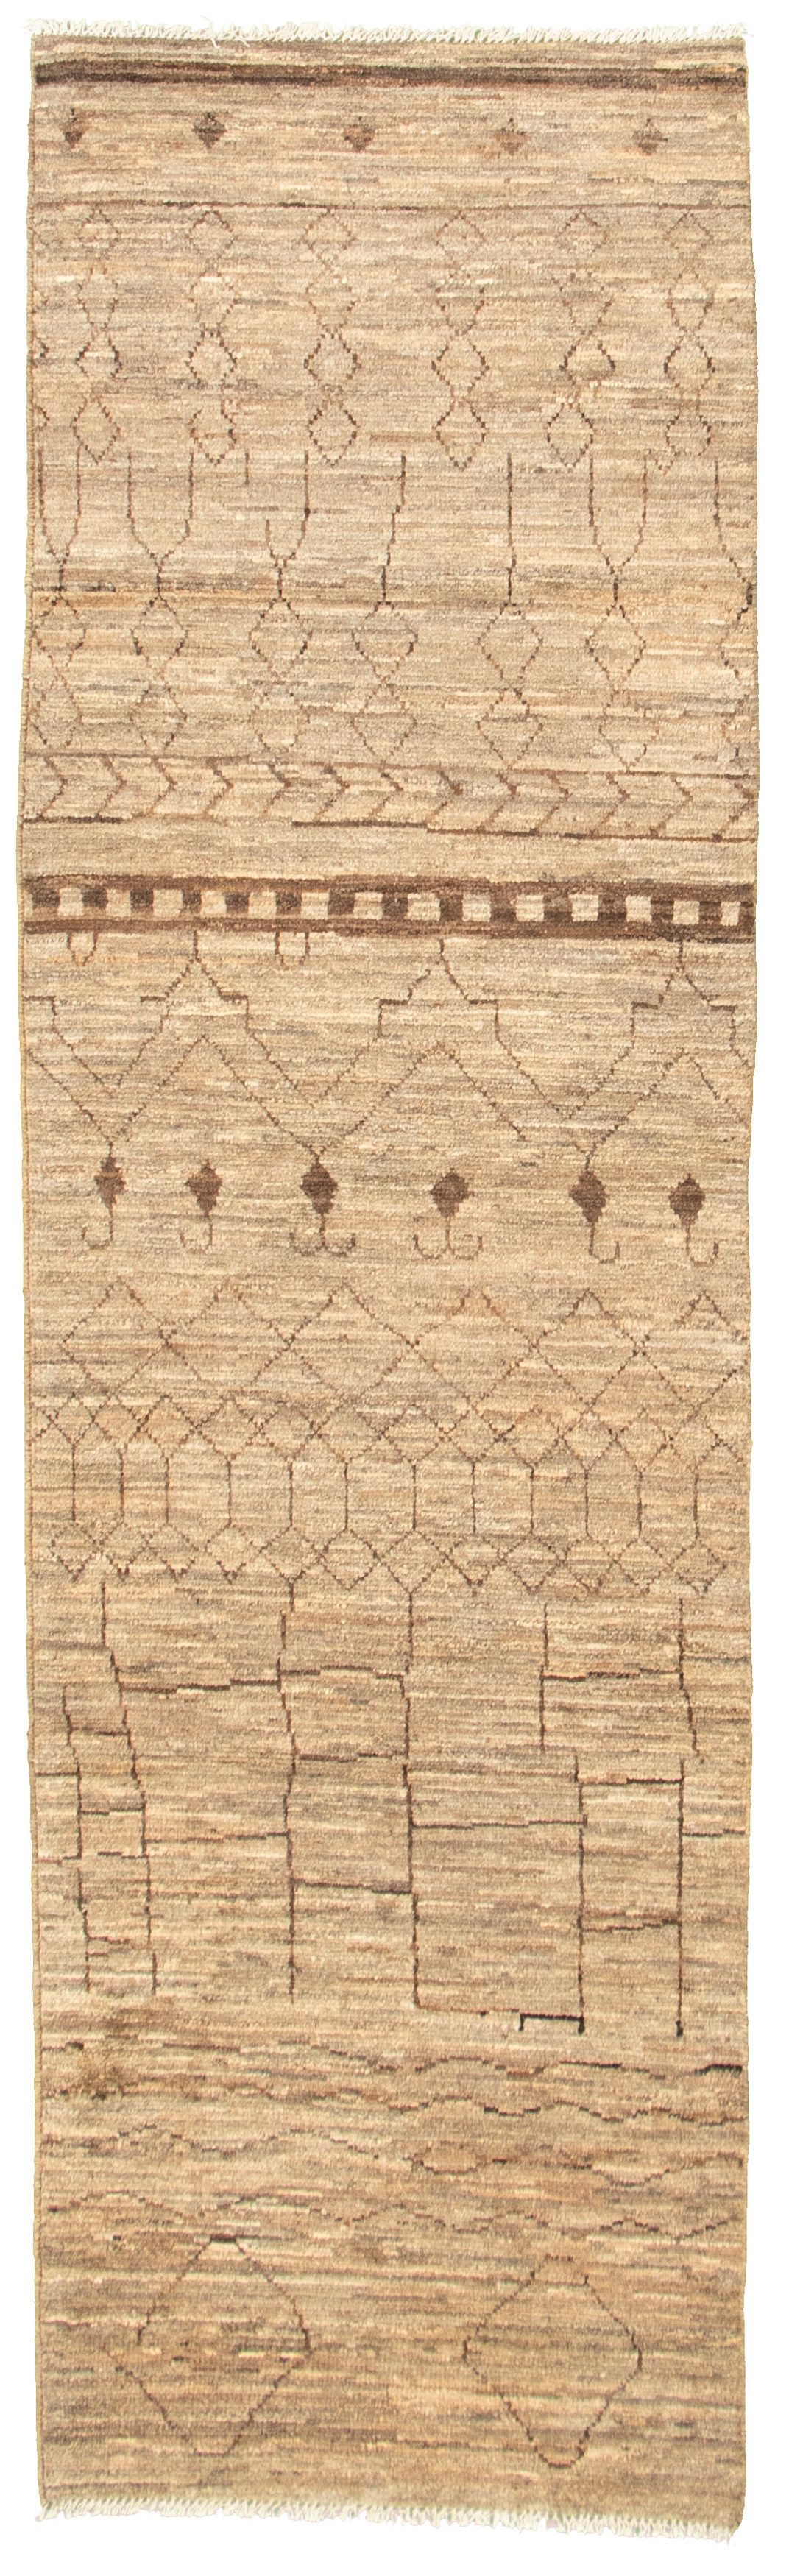 Hand-knotted Marrakech Tan Wool Rug 2'9" x 9'6" Size: 2'9" x 9'6"  